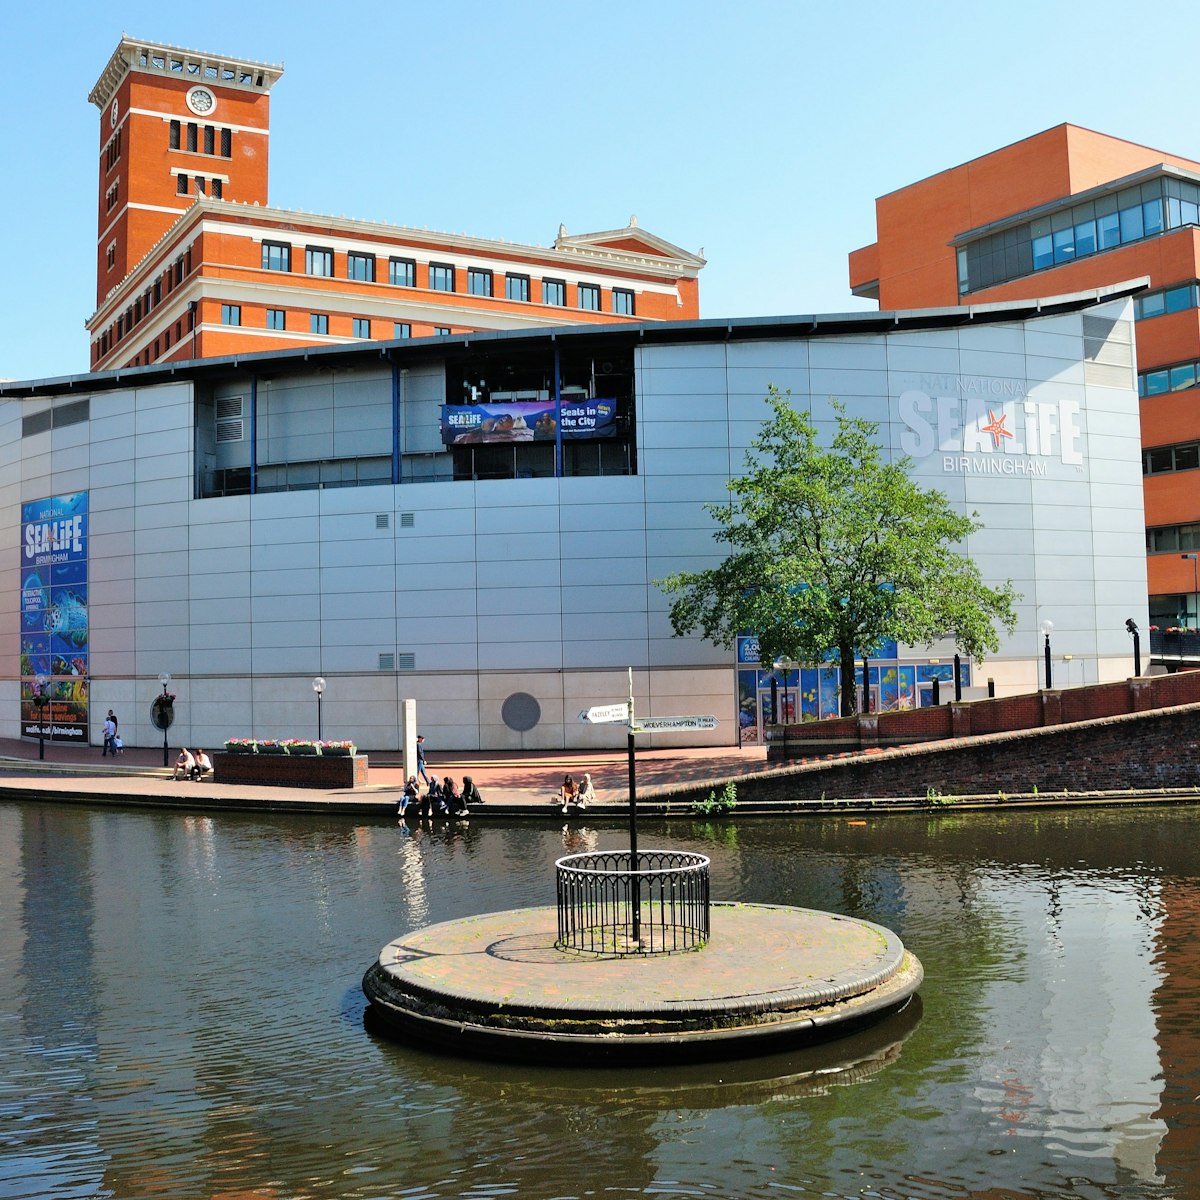 Birmingham, UK – June 29, 2019 - The National Sea Life Center displaying freshwater and marine life in Brindleyplace, Birmingham, West Midlands, England; Shutterstock ID 1969708588; your: Bridget; gl: Brown; netsuite: Online Editorial; full: POI Image Update

National Sea Life Centre

